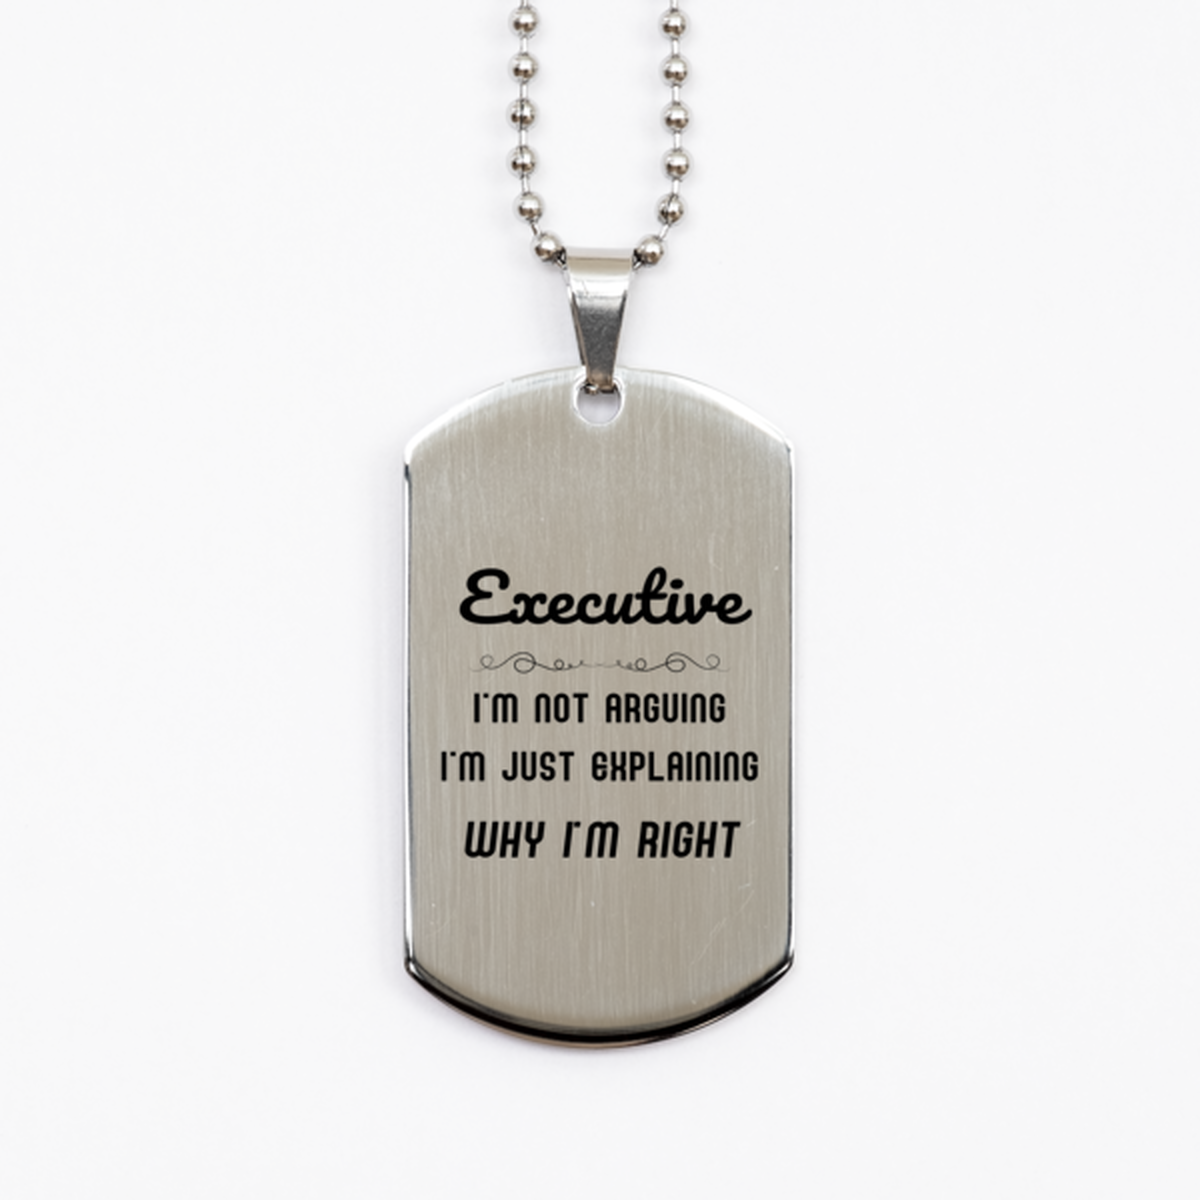 Executive I'm not Arguing. I'm Just Explaining Why I'm RIGHT Silver Dog Tag, Funny Saying Quote Executive Gifts For Executive Graduation Birthday Christmas Gifts for Men Women Coworker